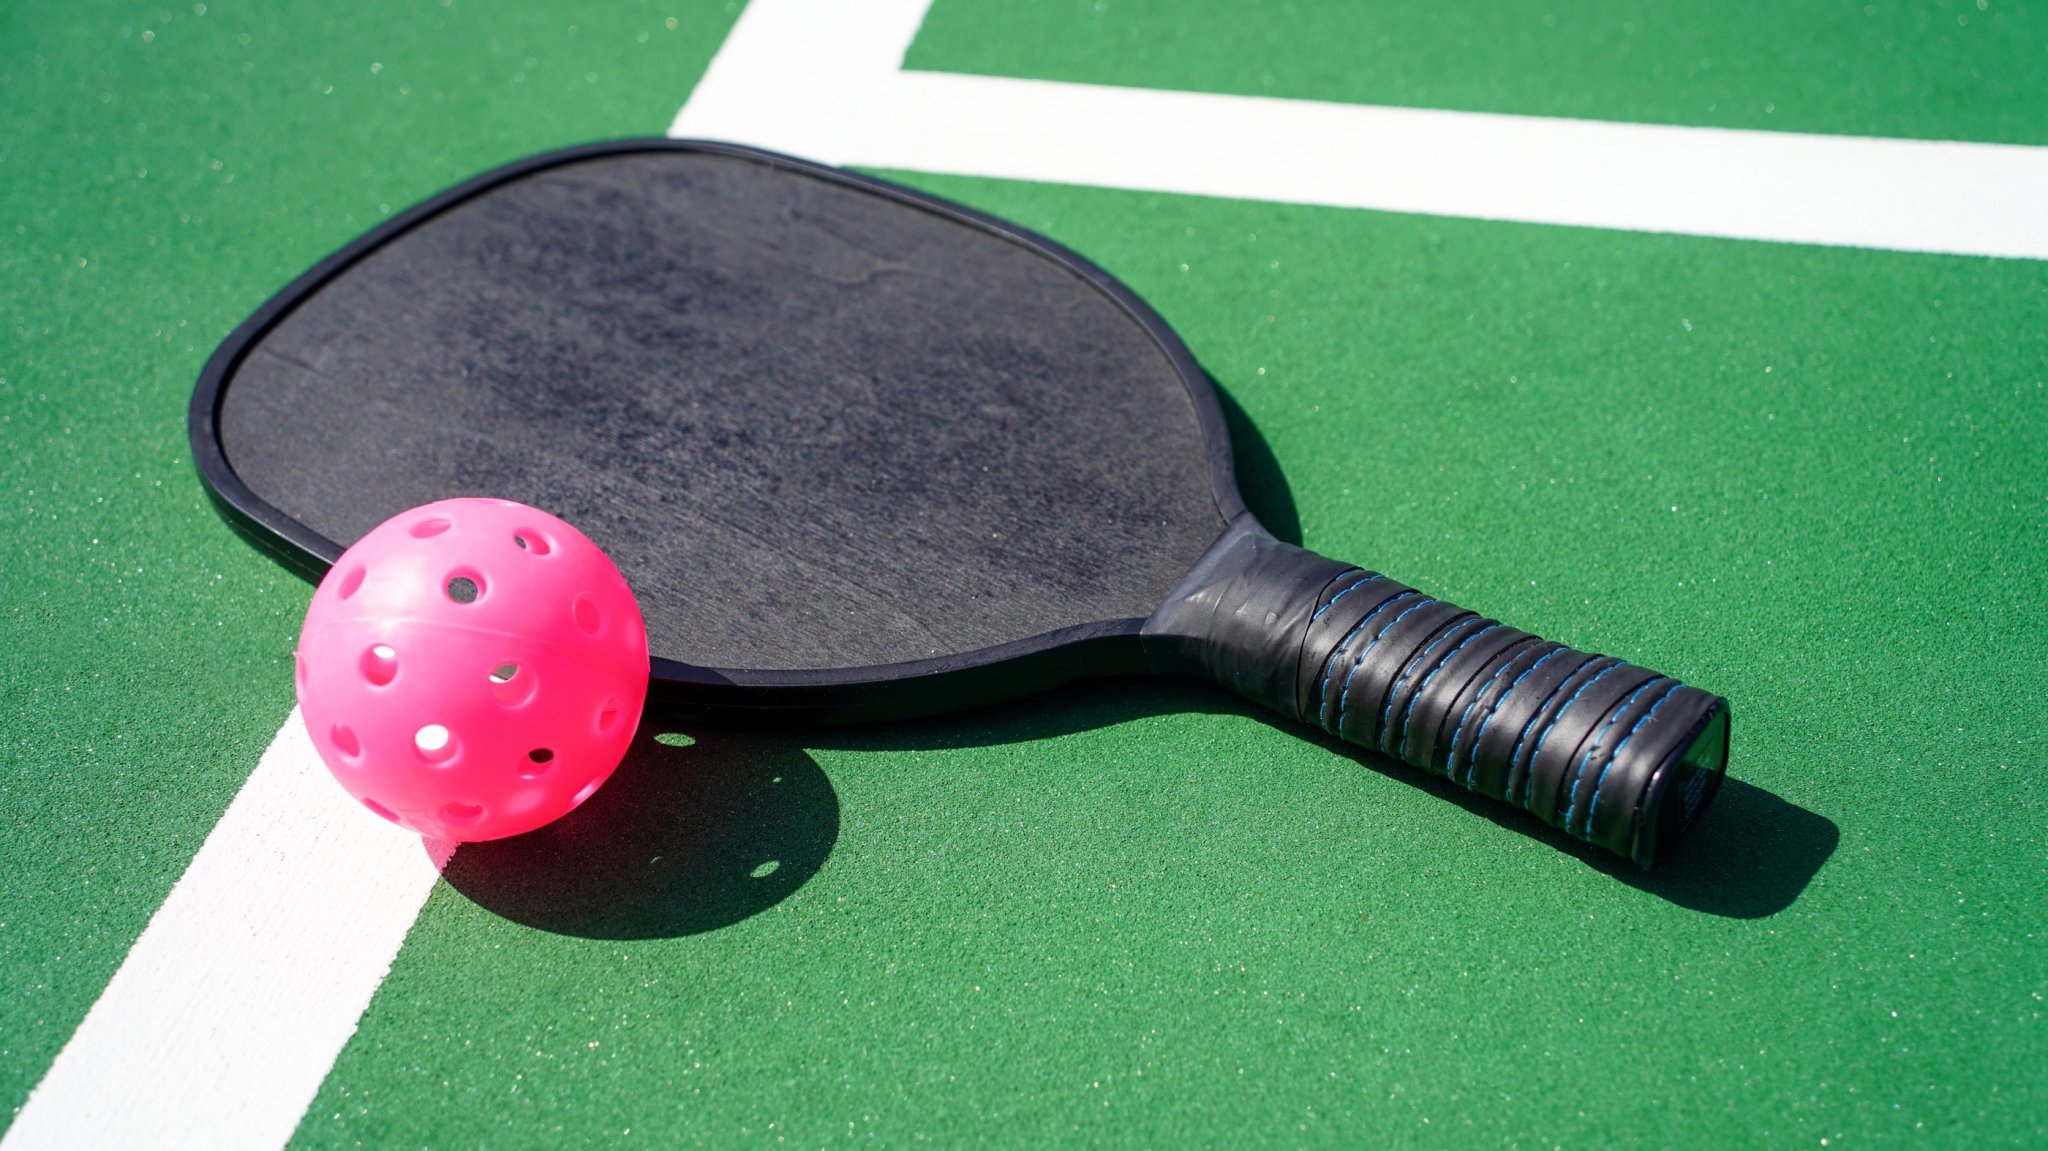 Here's why pickleball will never be a real sport - cover